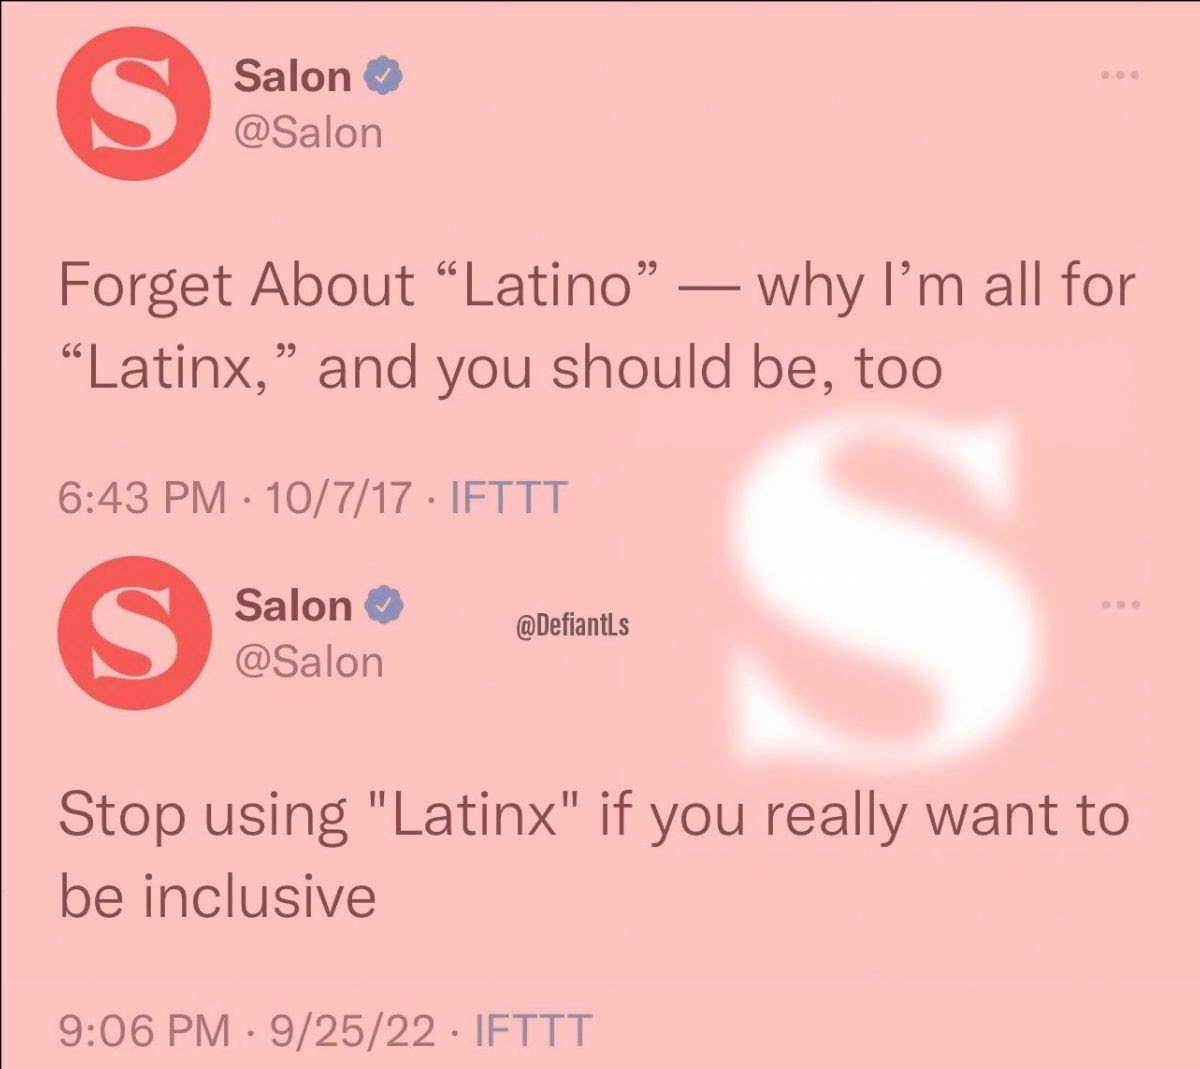 Hypocrite Salon Magazine. First it says use the word "Latinx" then it says the word is bad.